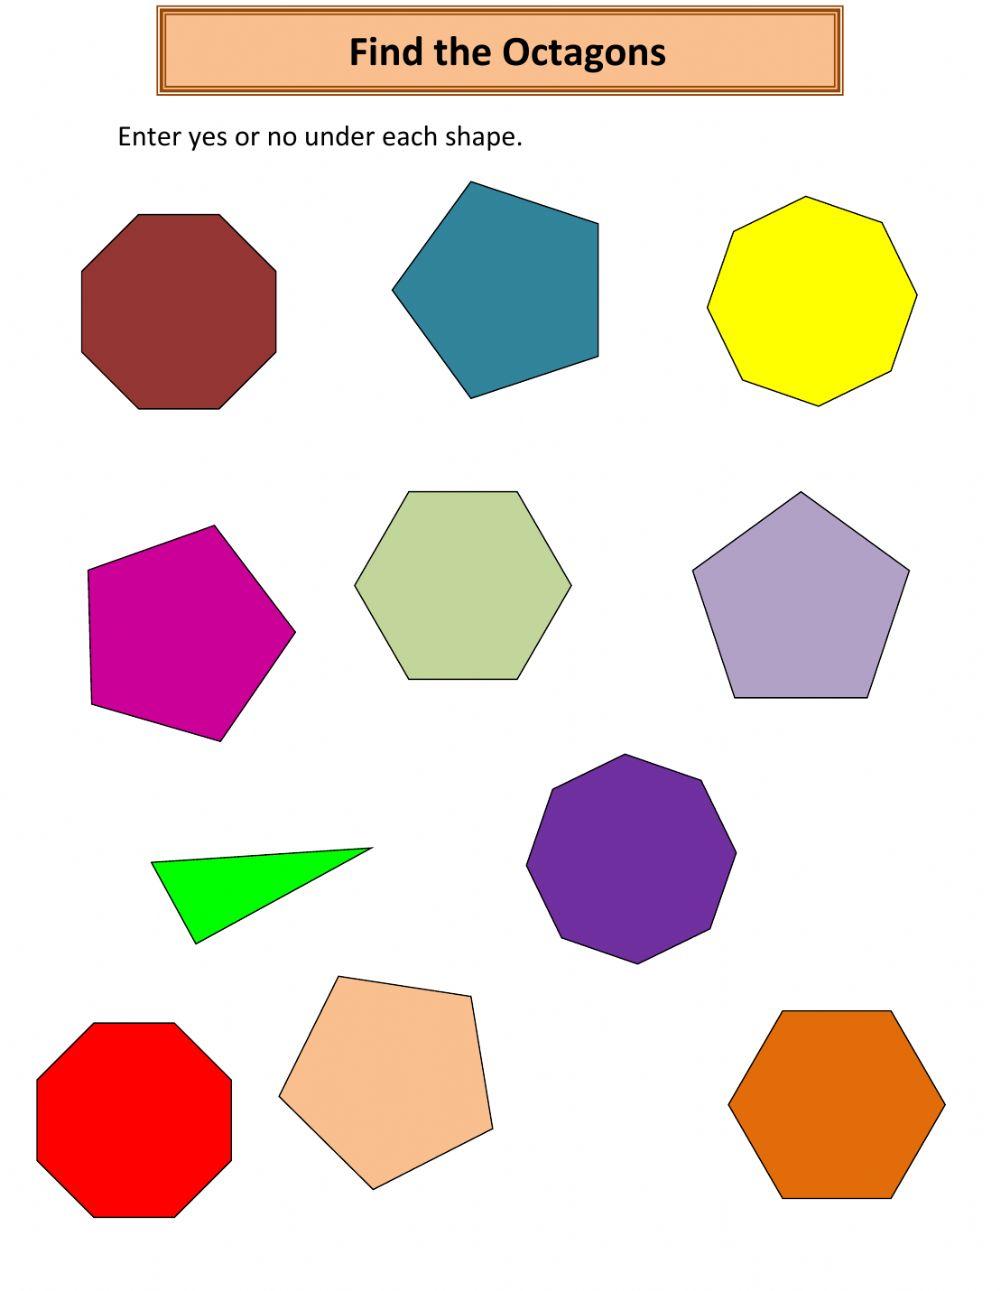 Find the Octagons